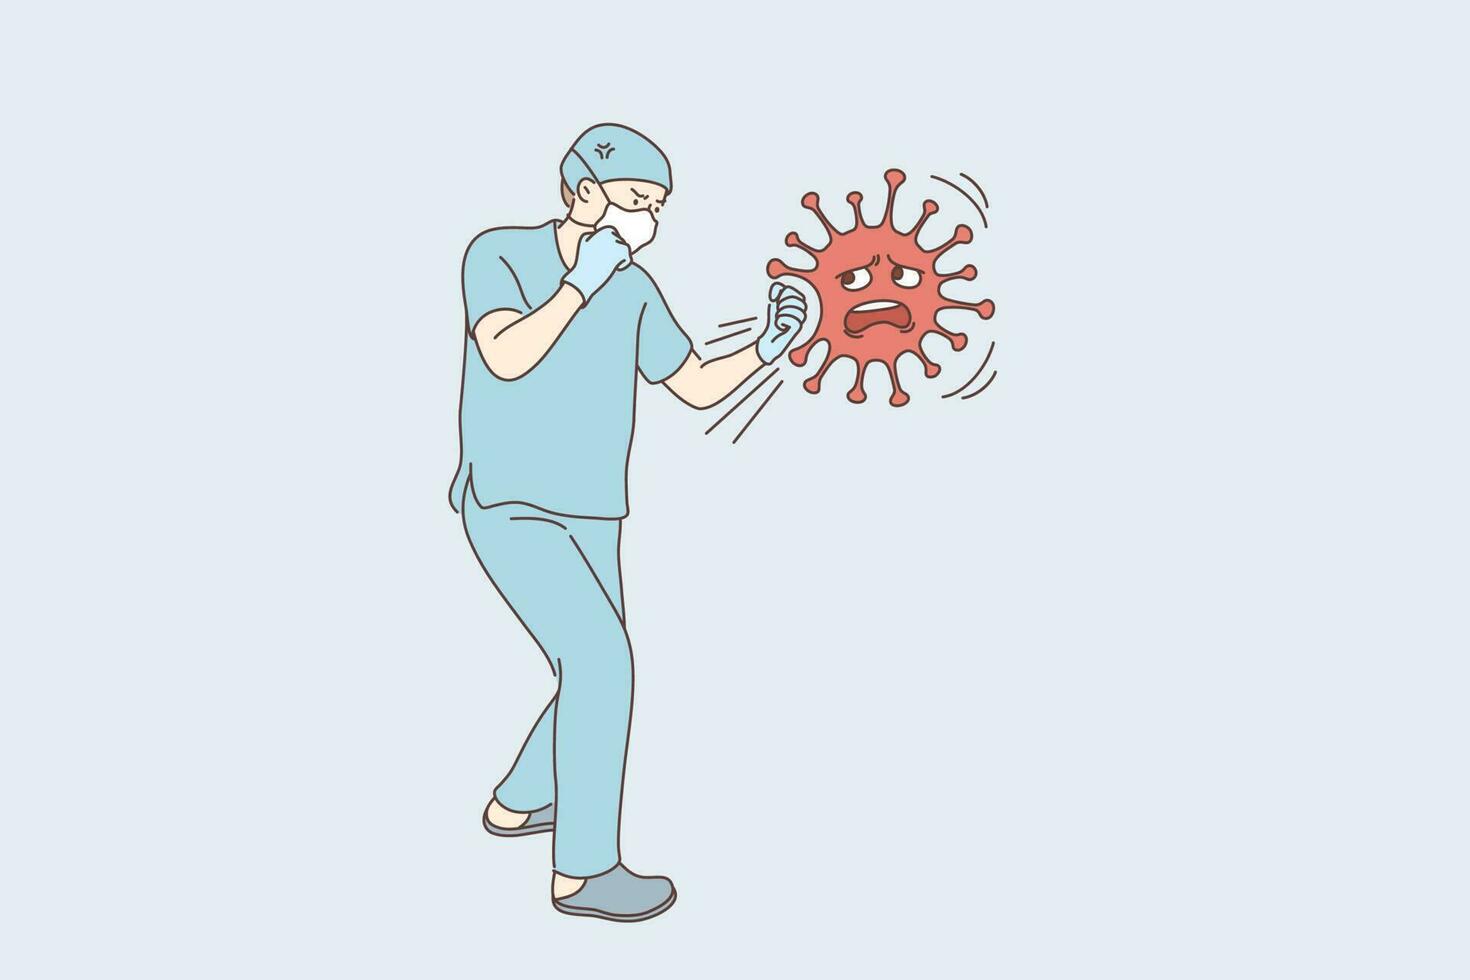 Coronavirus, fighting, infection, protection concept. Young man doctor cartoon character in medical face mask hitting or boxing 2019ncov virus. Struggle against covid19 pandemic desease illustration. vector